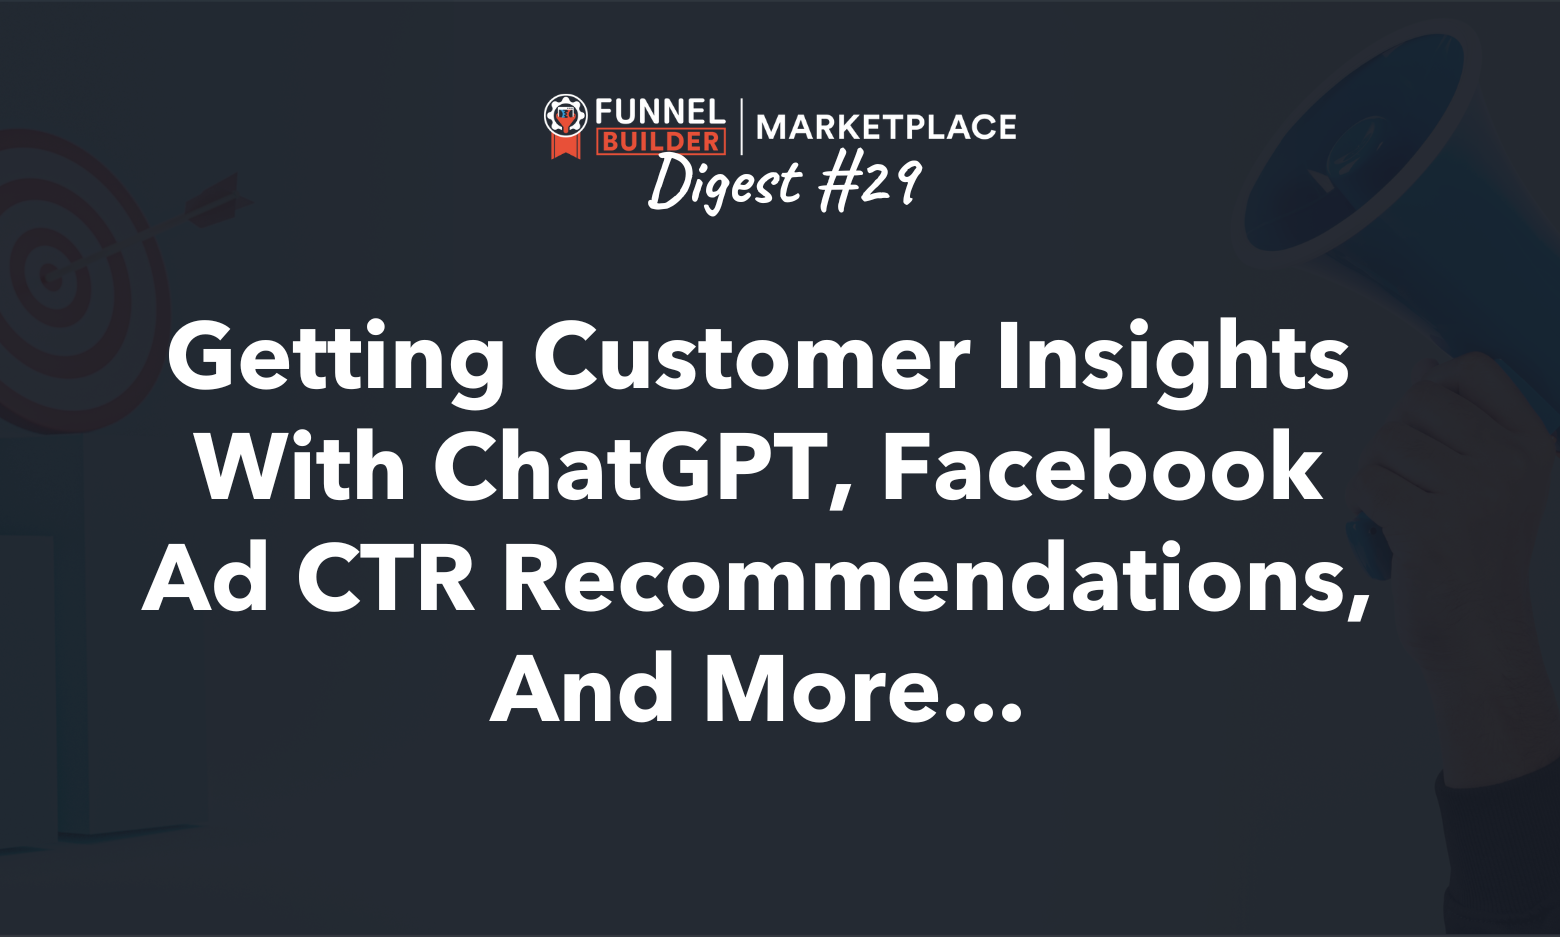 FBM Digest #29: Getting customer insights with ChatGPT, Facebook ad CTR recommendations, and more...